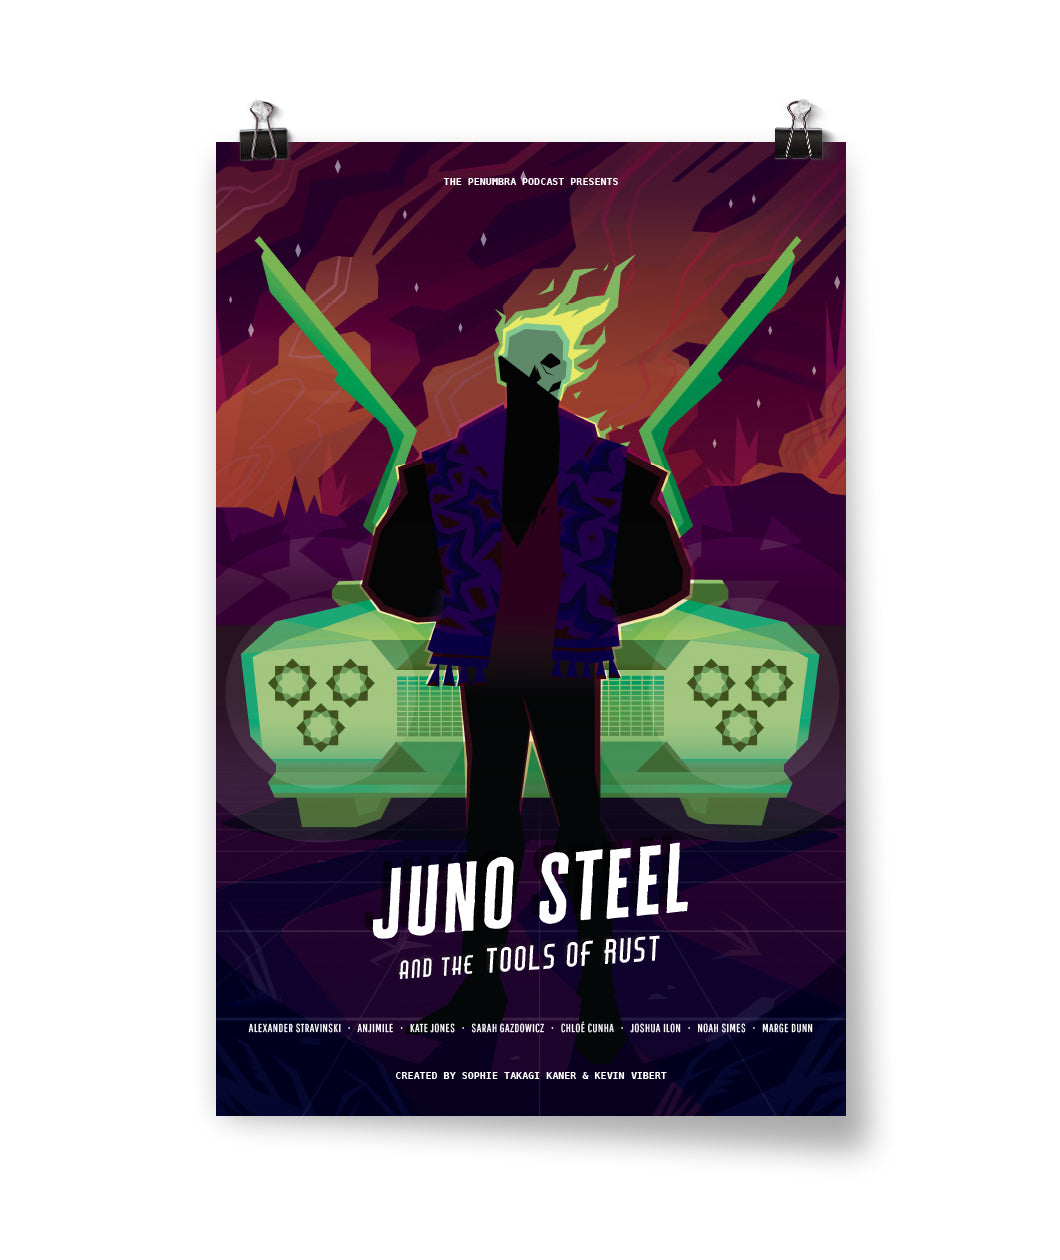 Juno Steel and the Tools of Rust